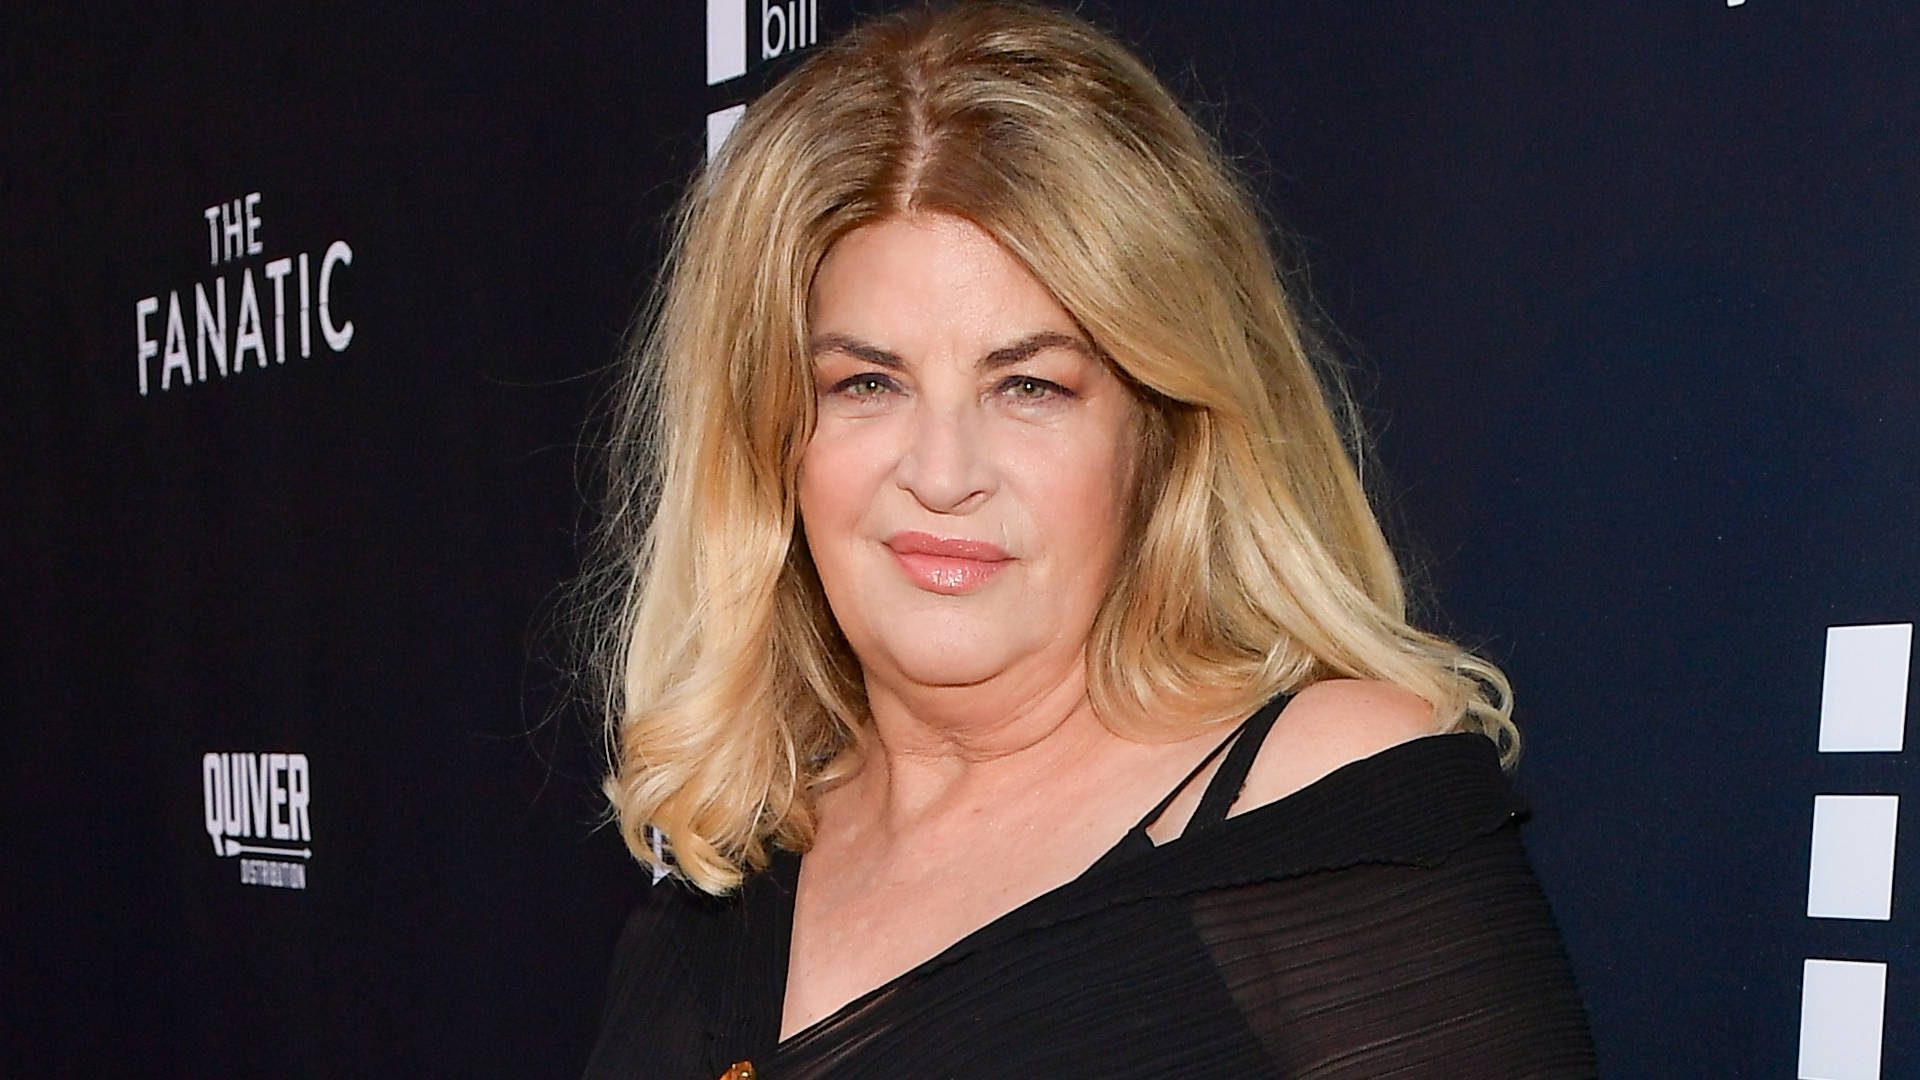 Kirstie Alley In The Fanatic Red Carpet Event Background